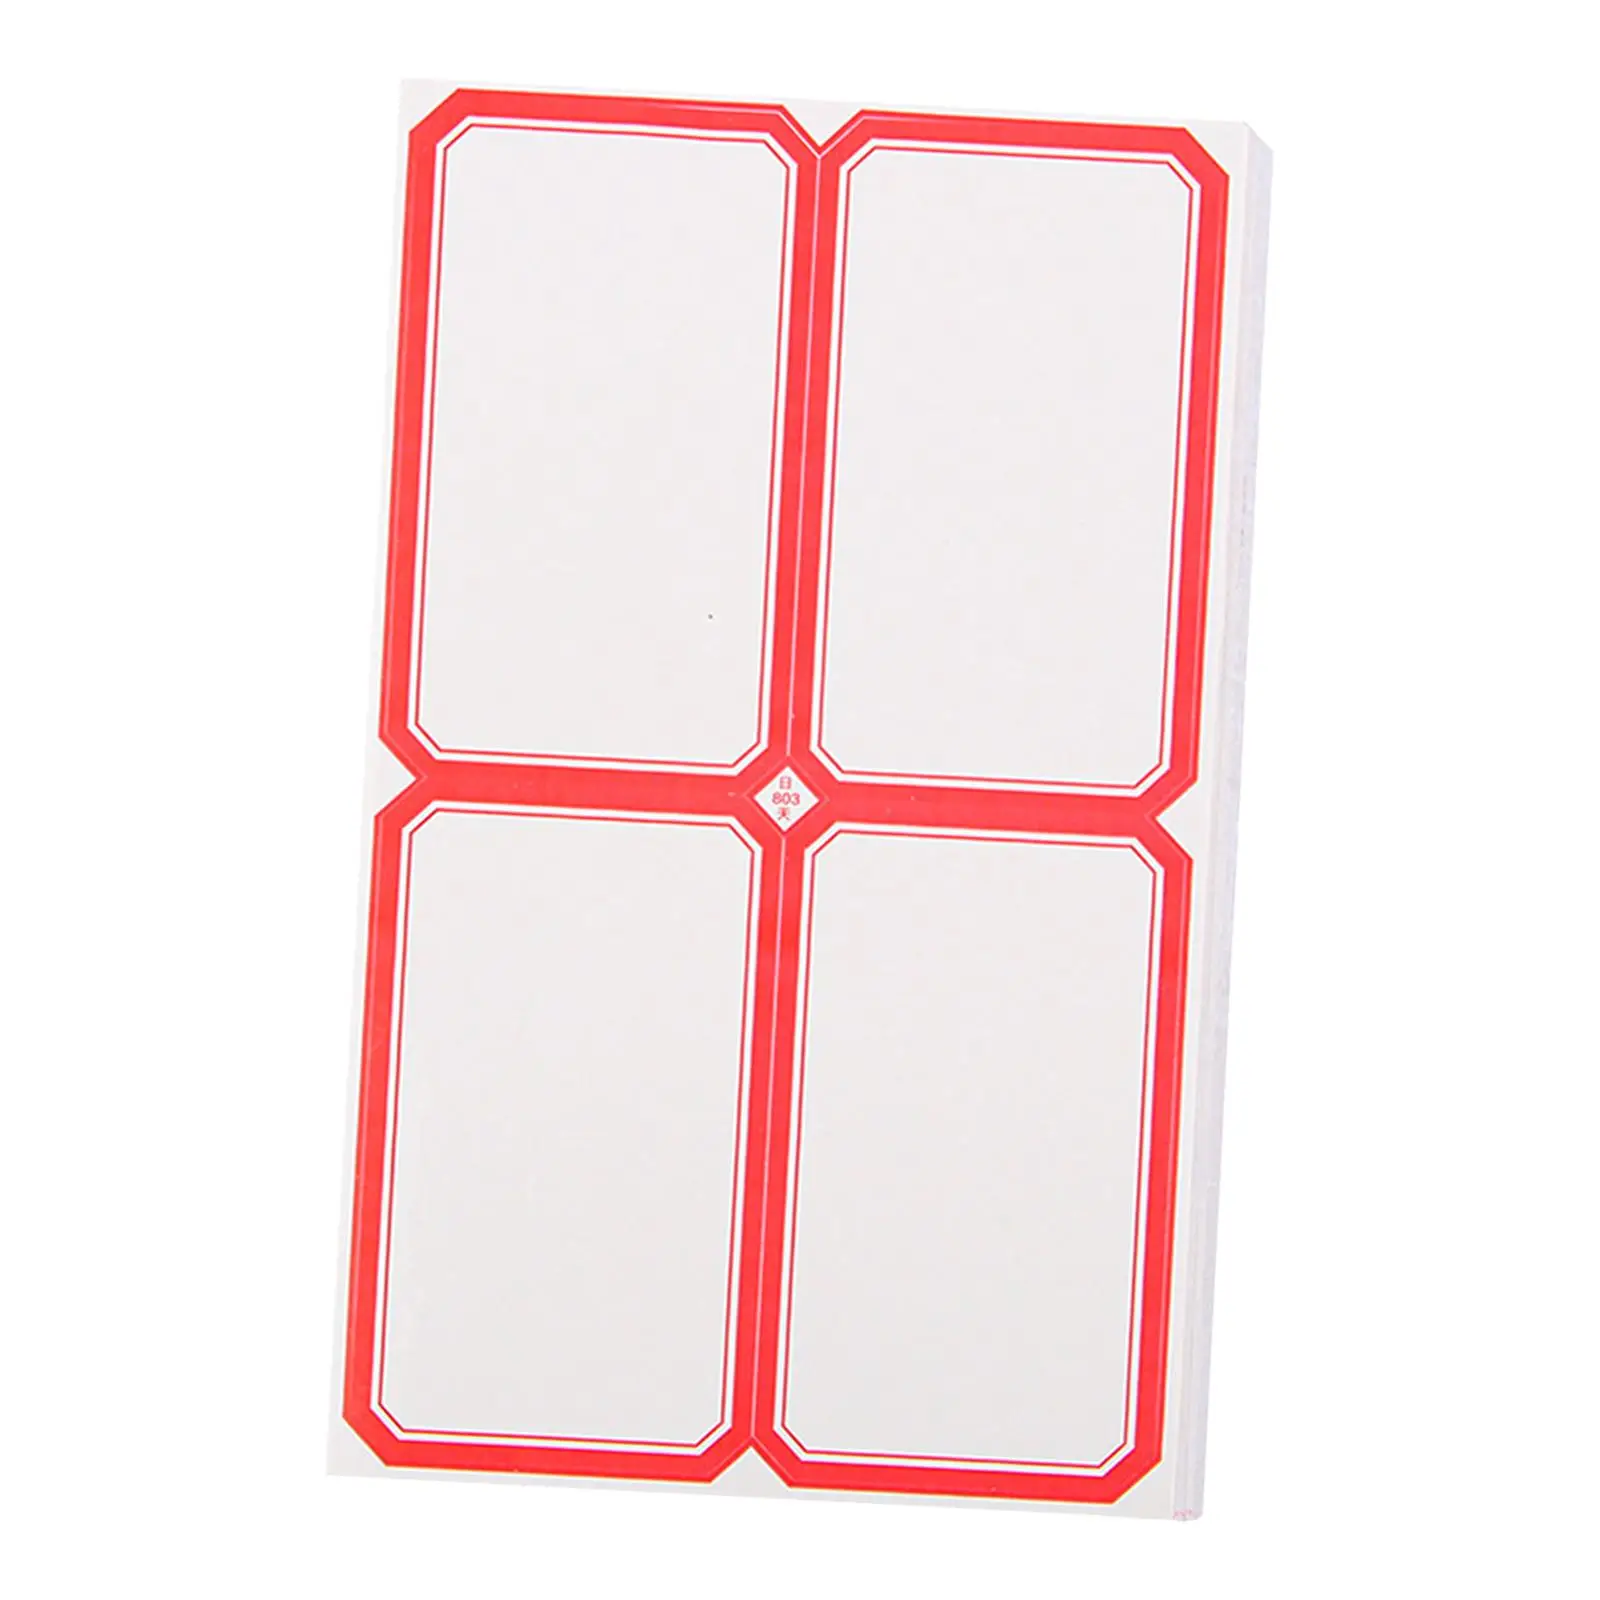 50 Sheets Name Tag Labels Bookmarks Name Tag Stickers for Hand Labelling Group Education Book Annotations Page Marking Warehouse